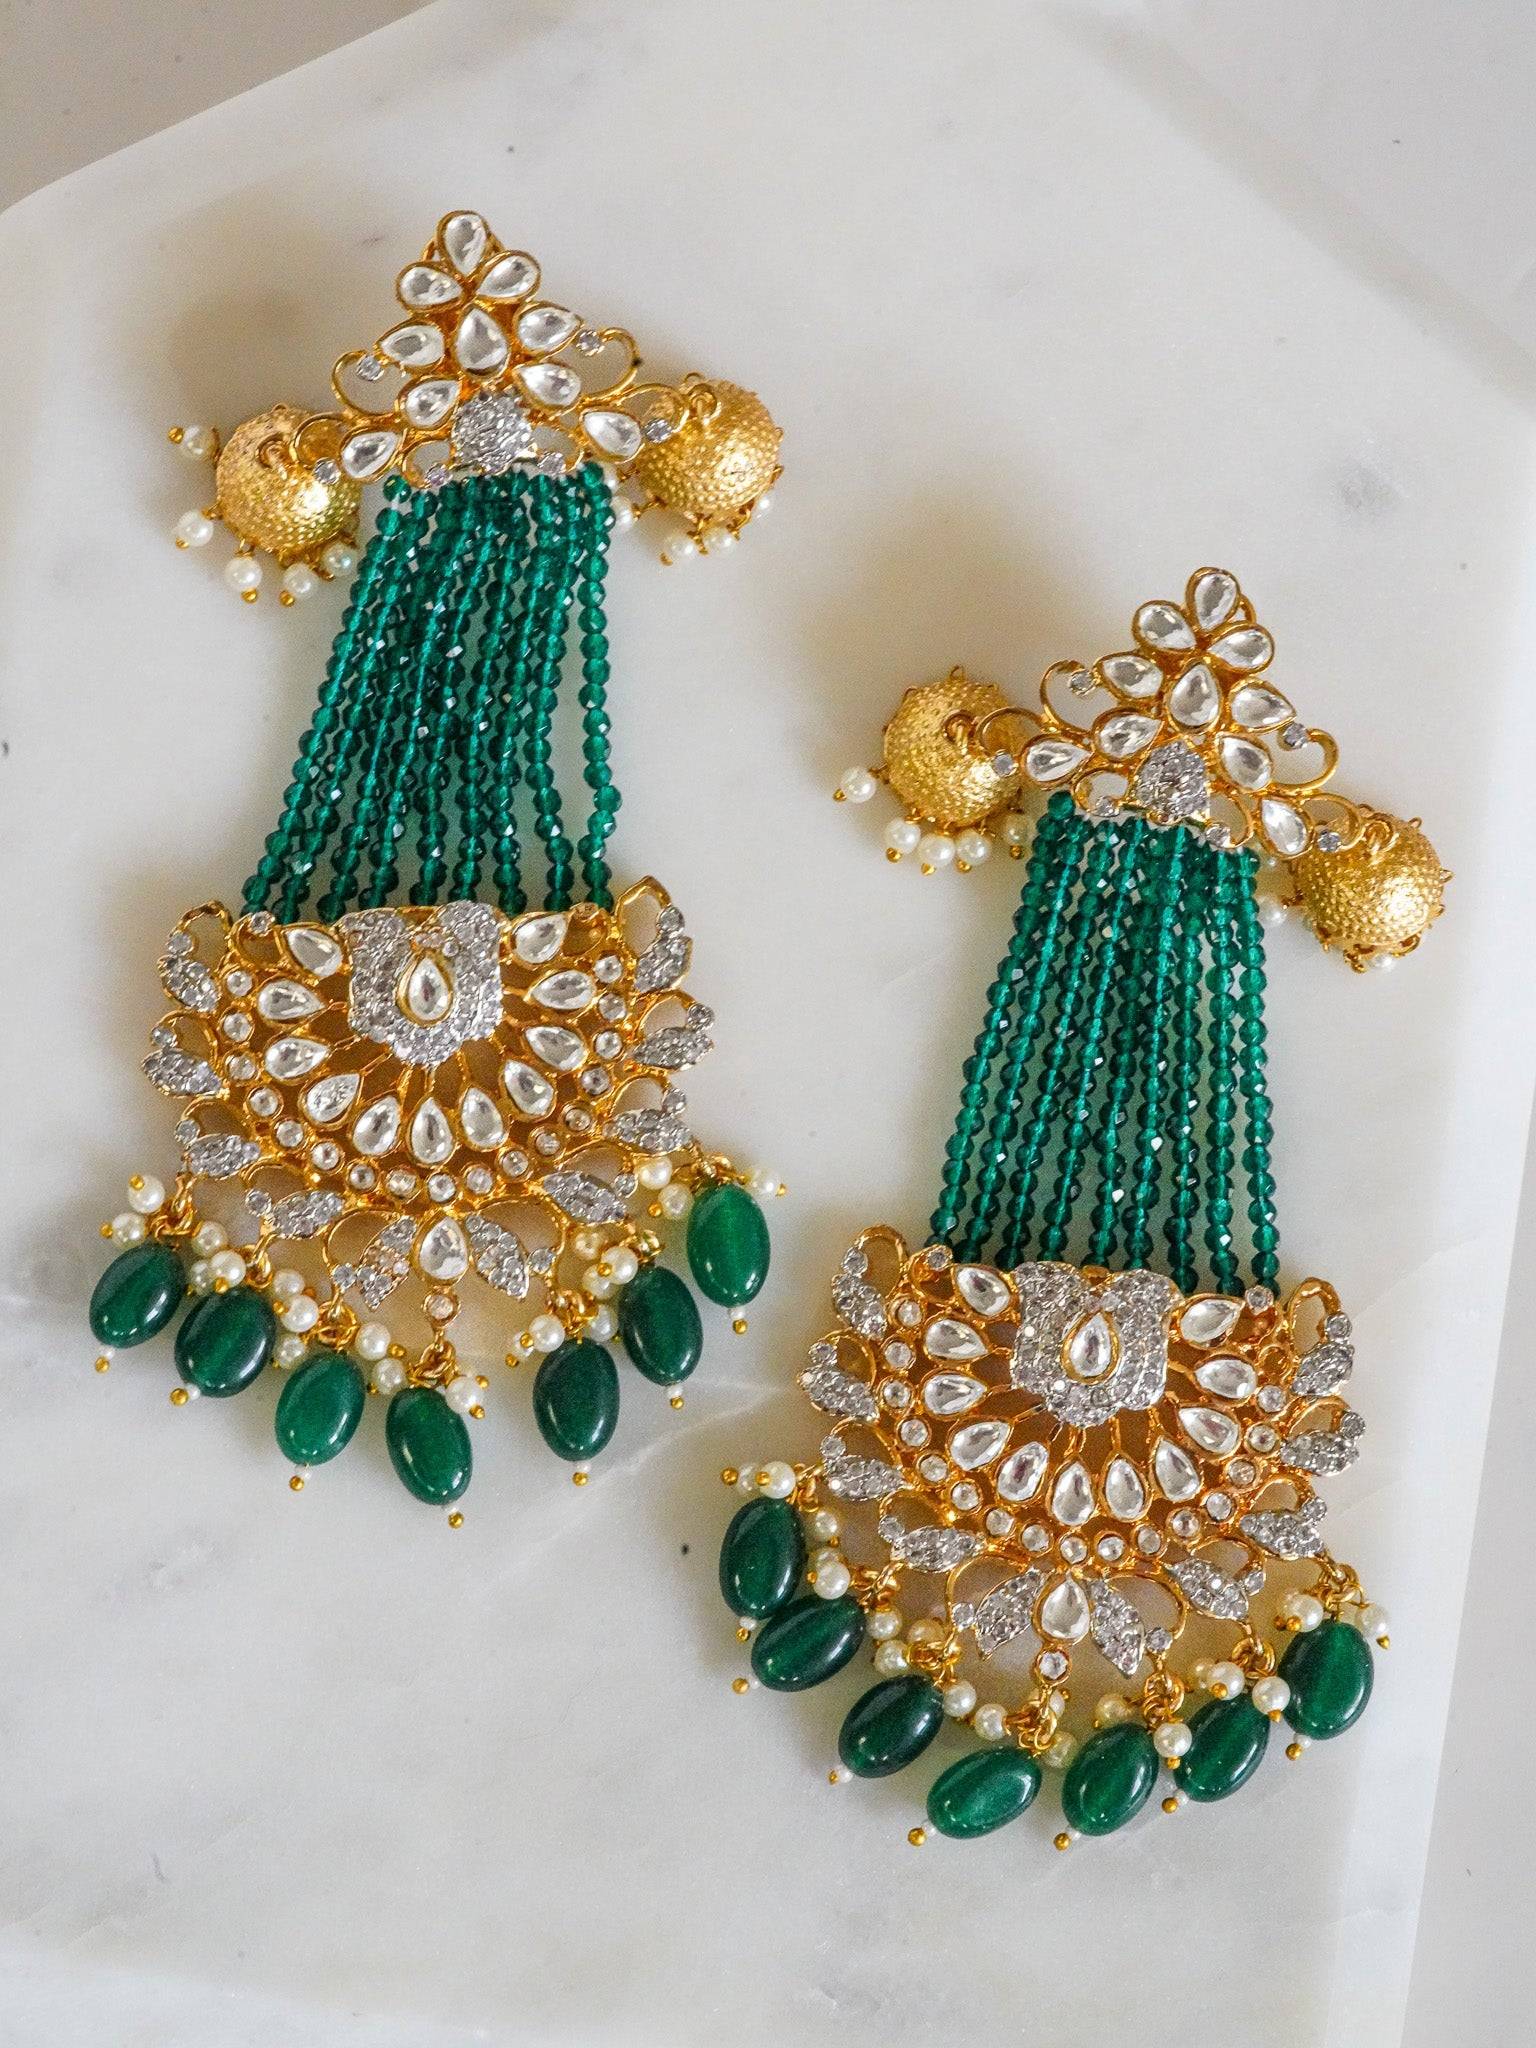 Meenu Chandelier Earrings - Gold plated with green beads, authentic Moissanite Polki, and white Diamante AD stones, featuring mini jhumkas and intricate design.